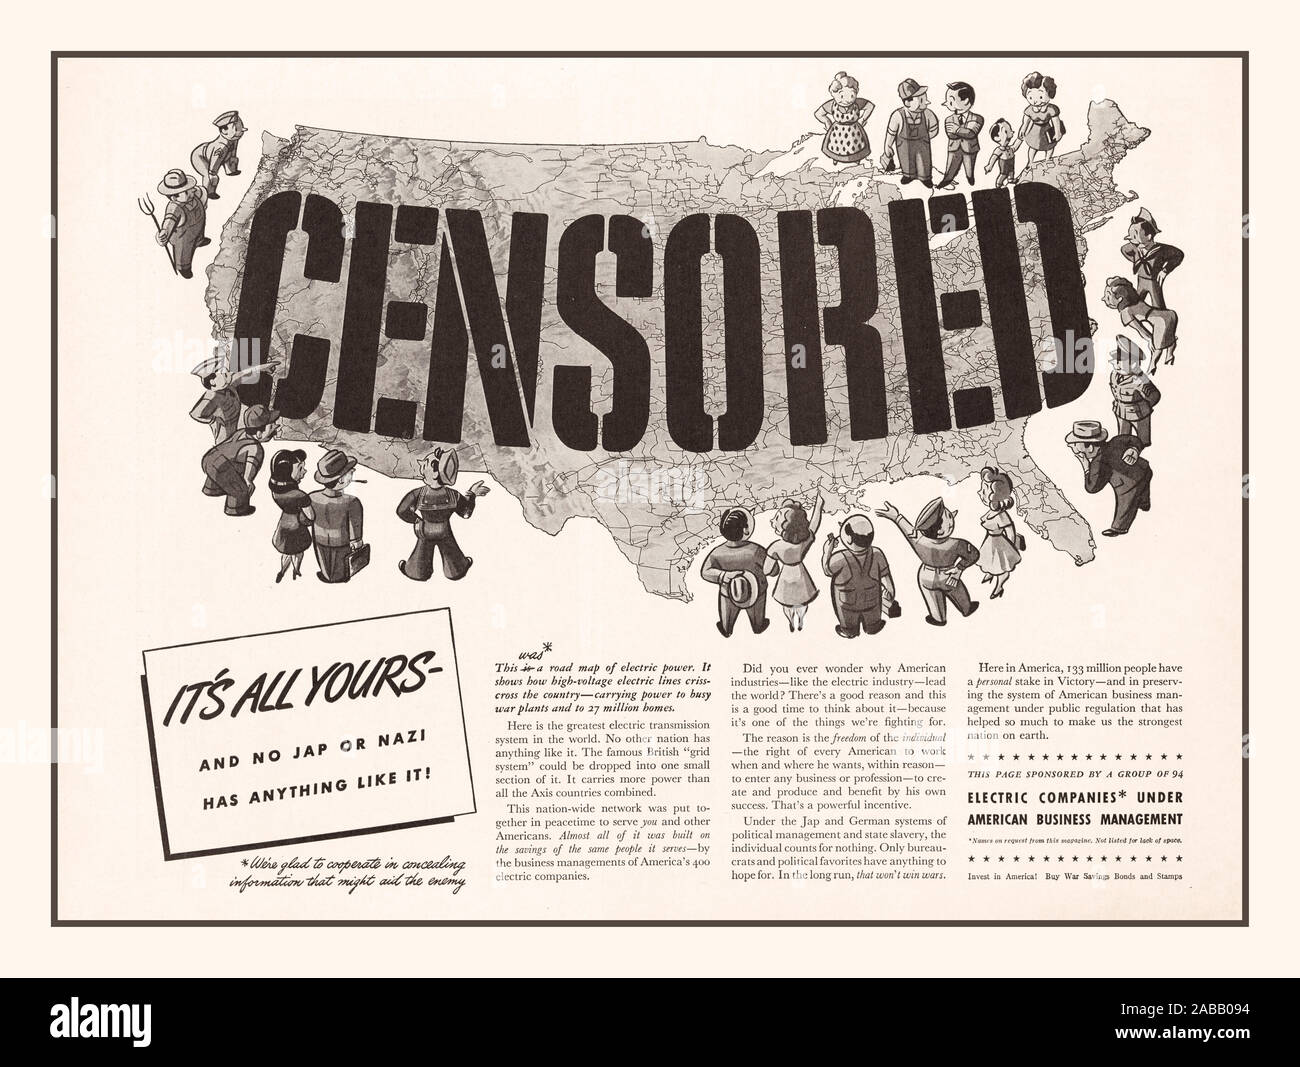 WW2 1942  'CENSORED' American Propaganda advertisement by 94 American electric power companies promotes 'the greatest electrical transmission system in the world,' emphasizing that 'It's all yours & no Jap or Nazi has anything like it!' The details are intentionally blurred and overprinted 'CENSORED,' with a note that 'We're glad to cooperate in concealing information that might aid the enemy' (alluding to possible sabotage). The text lauds the products of American creative freedom, contrasted with 'the Jap and German systems of political management and state slavery.' Stock Photo